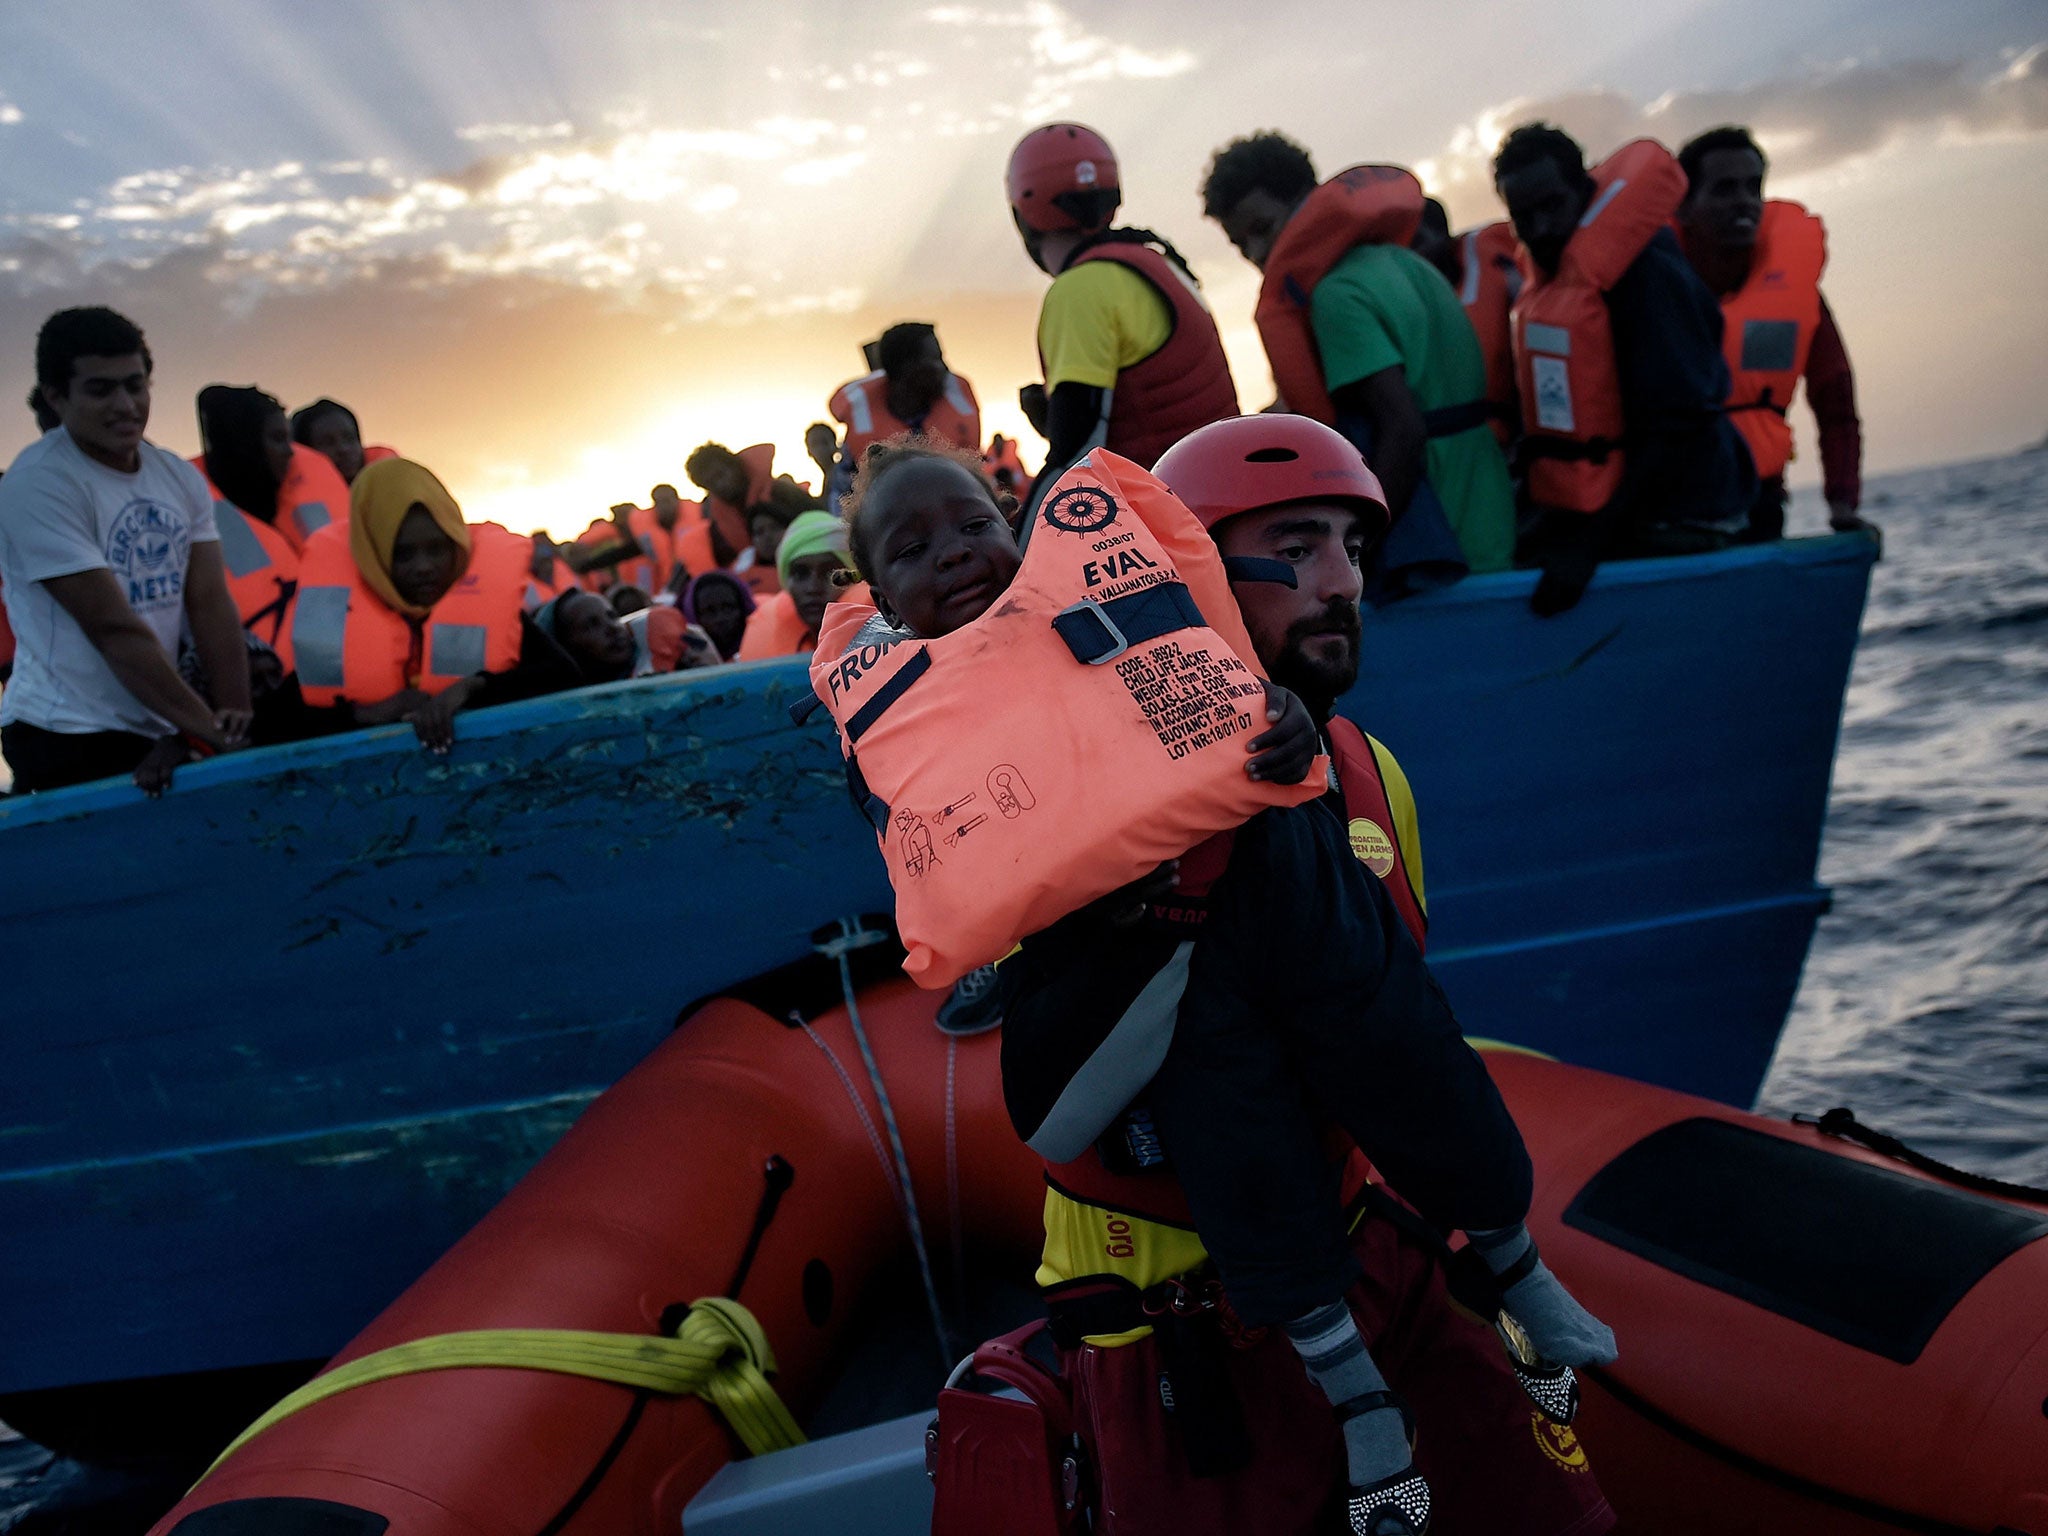 A child from African origin is rescued from a distressed vessel by a member of Proactiva Open Arms NGO 20 nautical miles north of Libya on 3 October